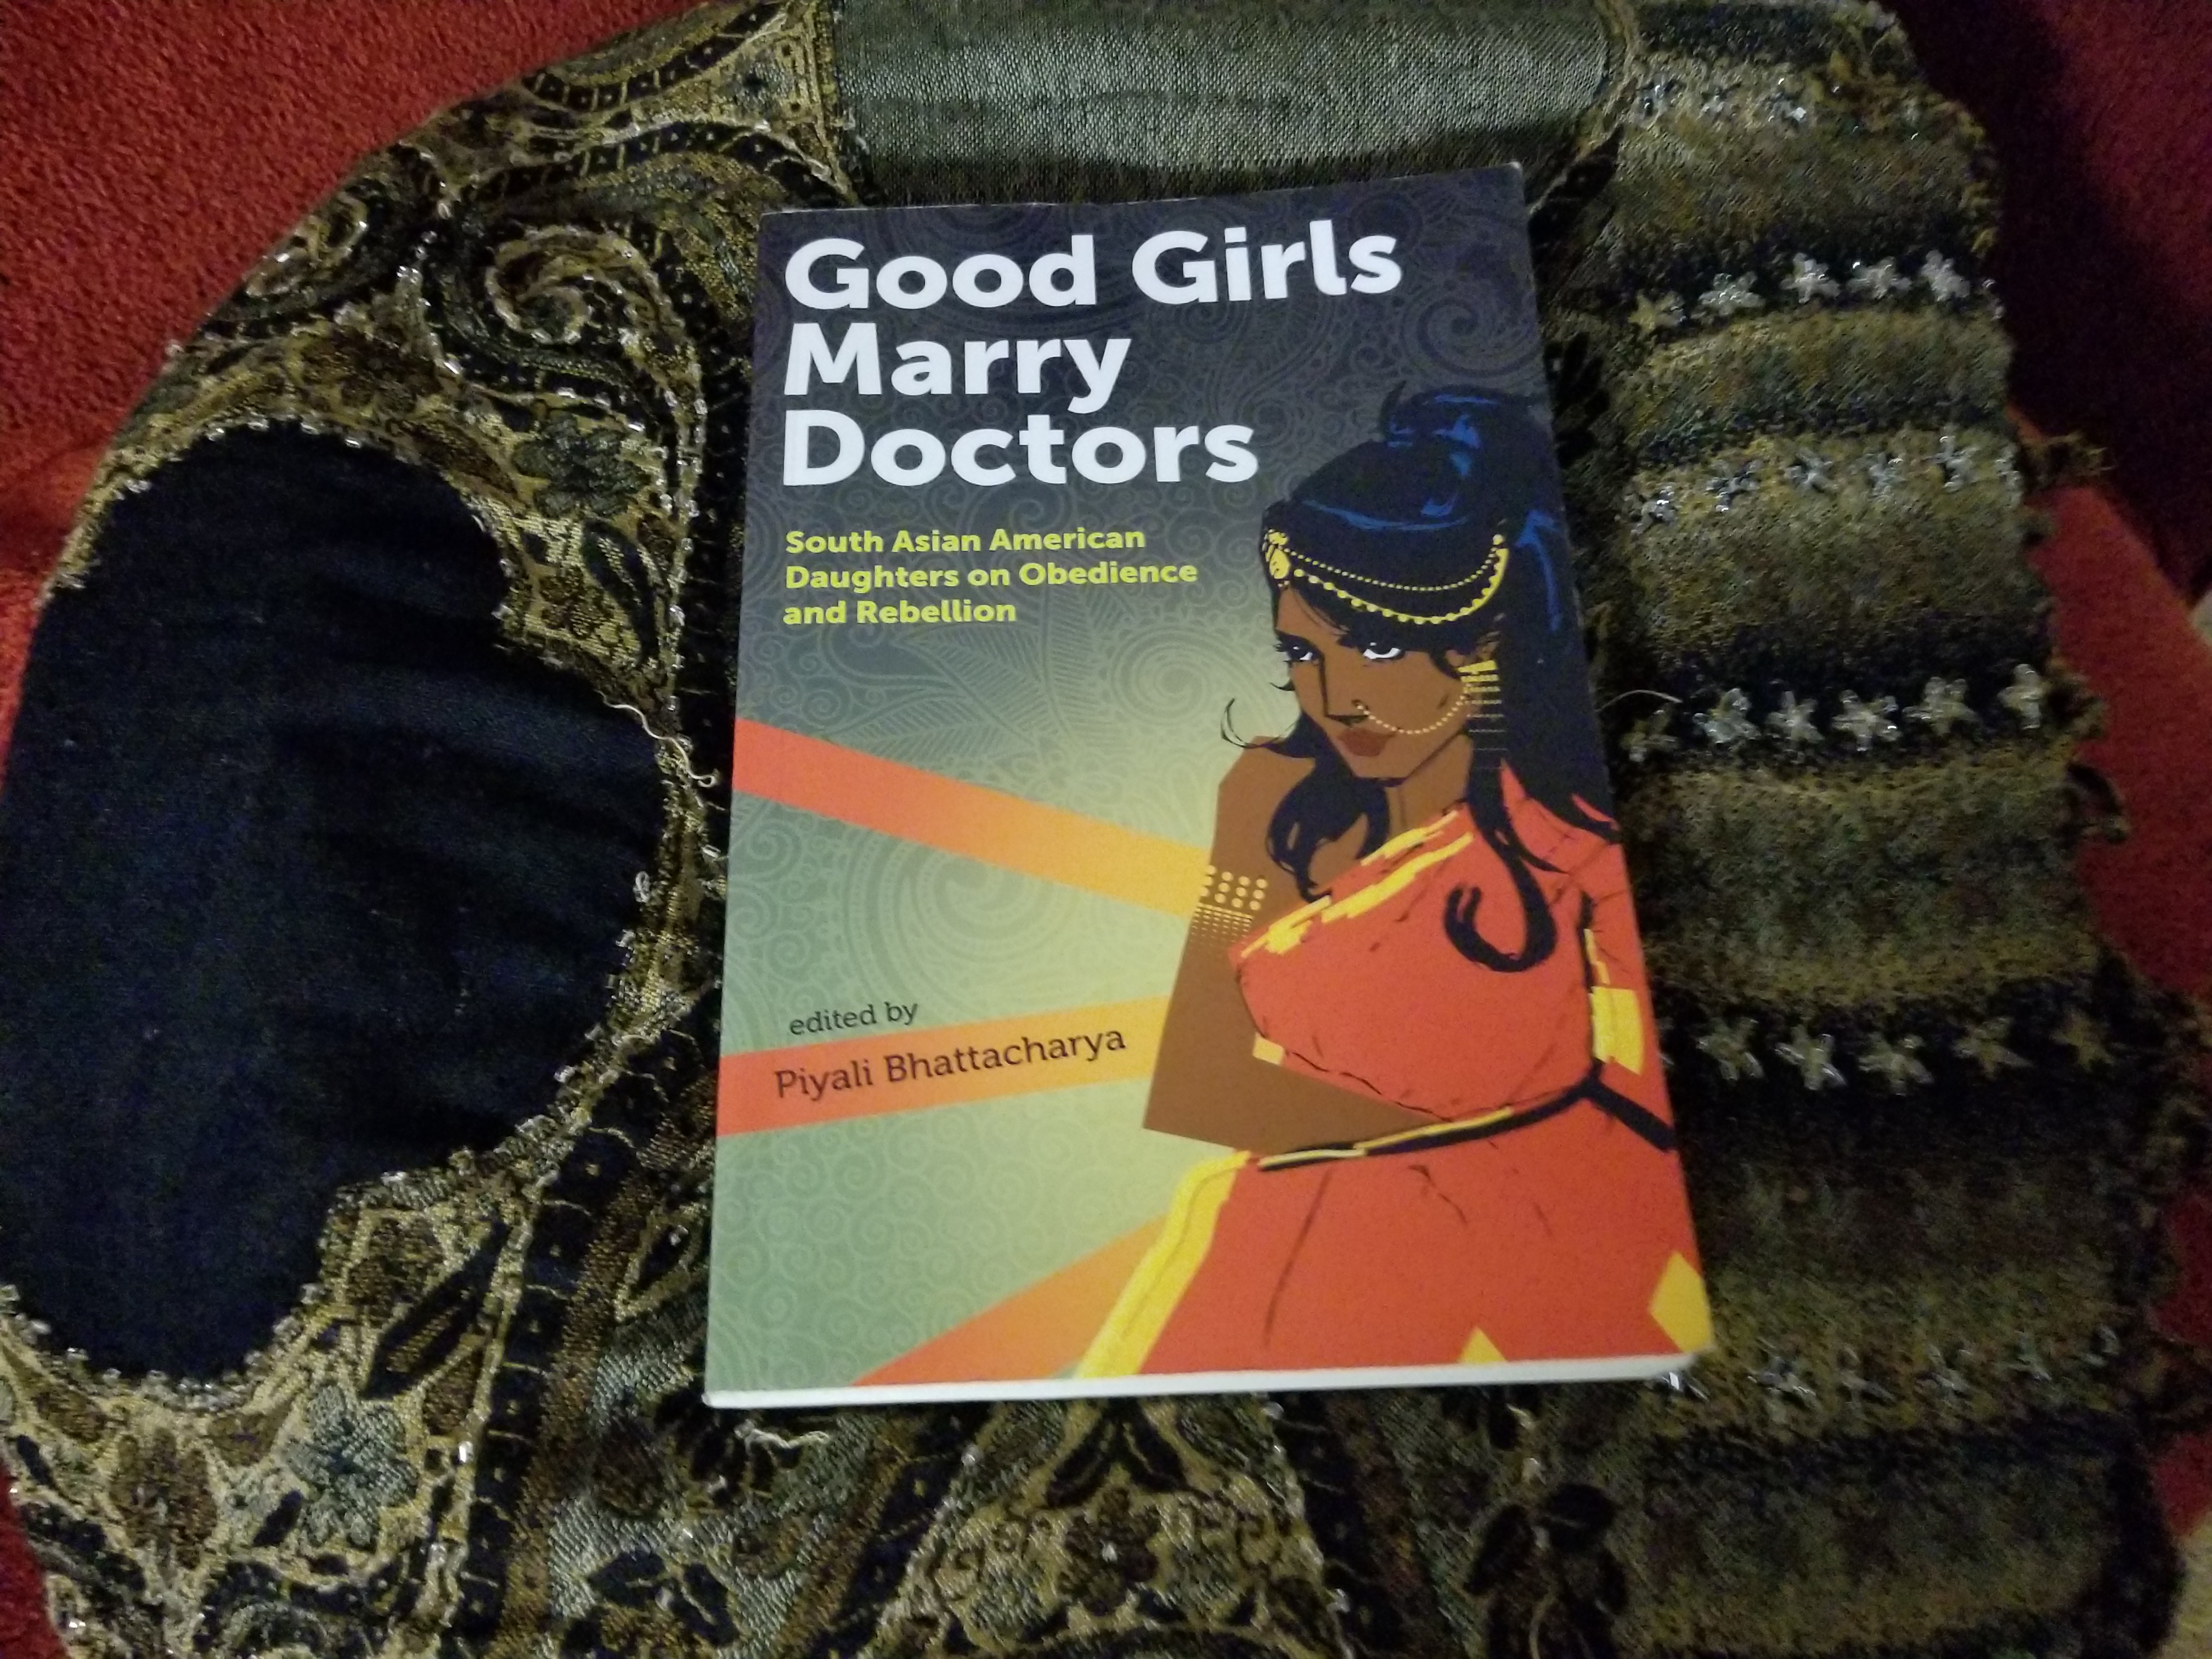 The Ultimate Brown Girl Power: “Good Girls Marry Doctors”